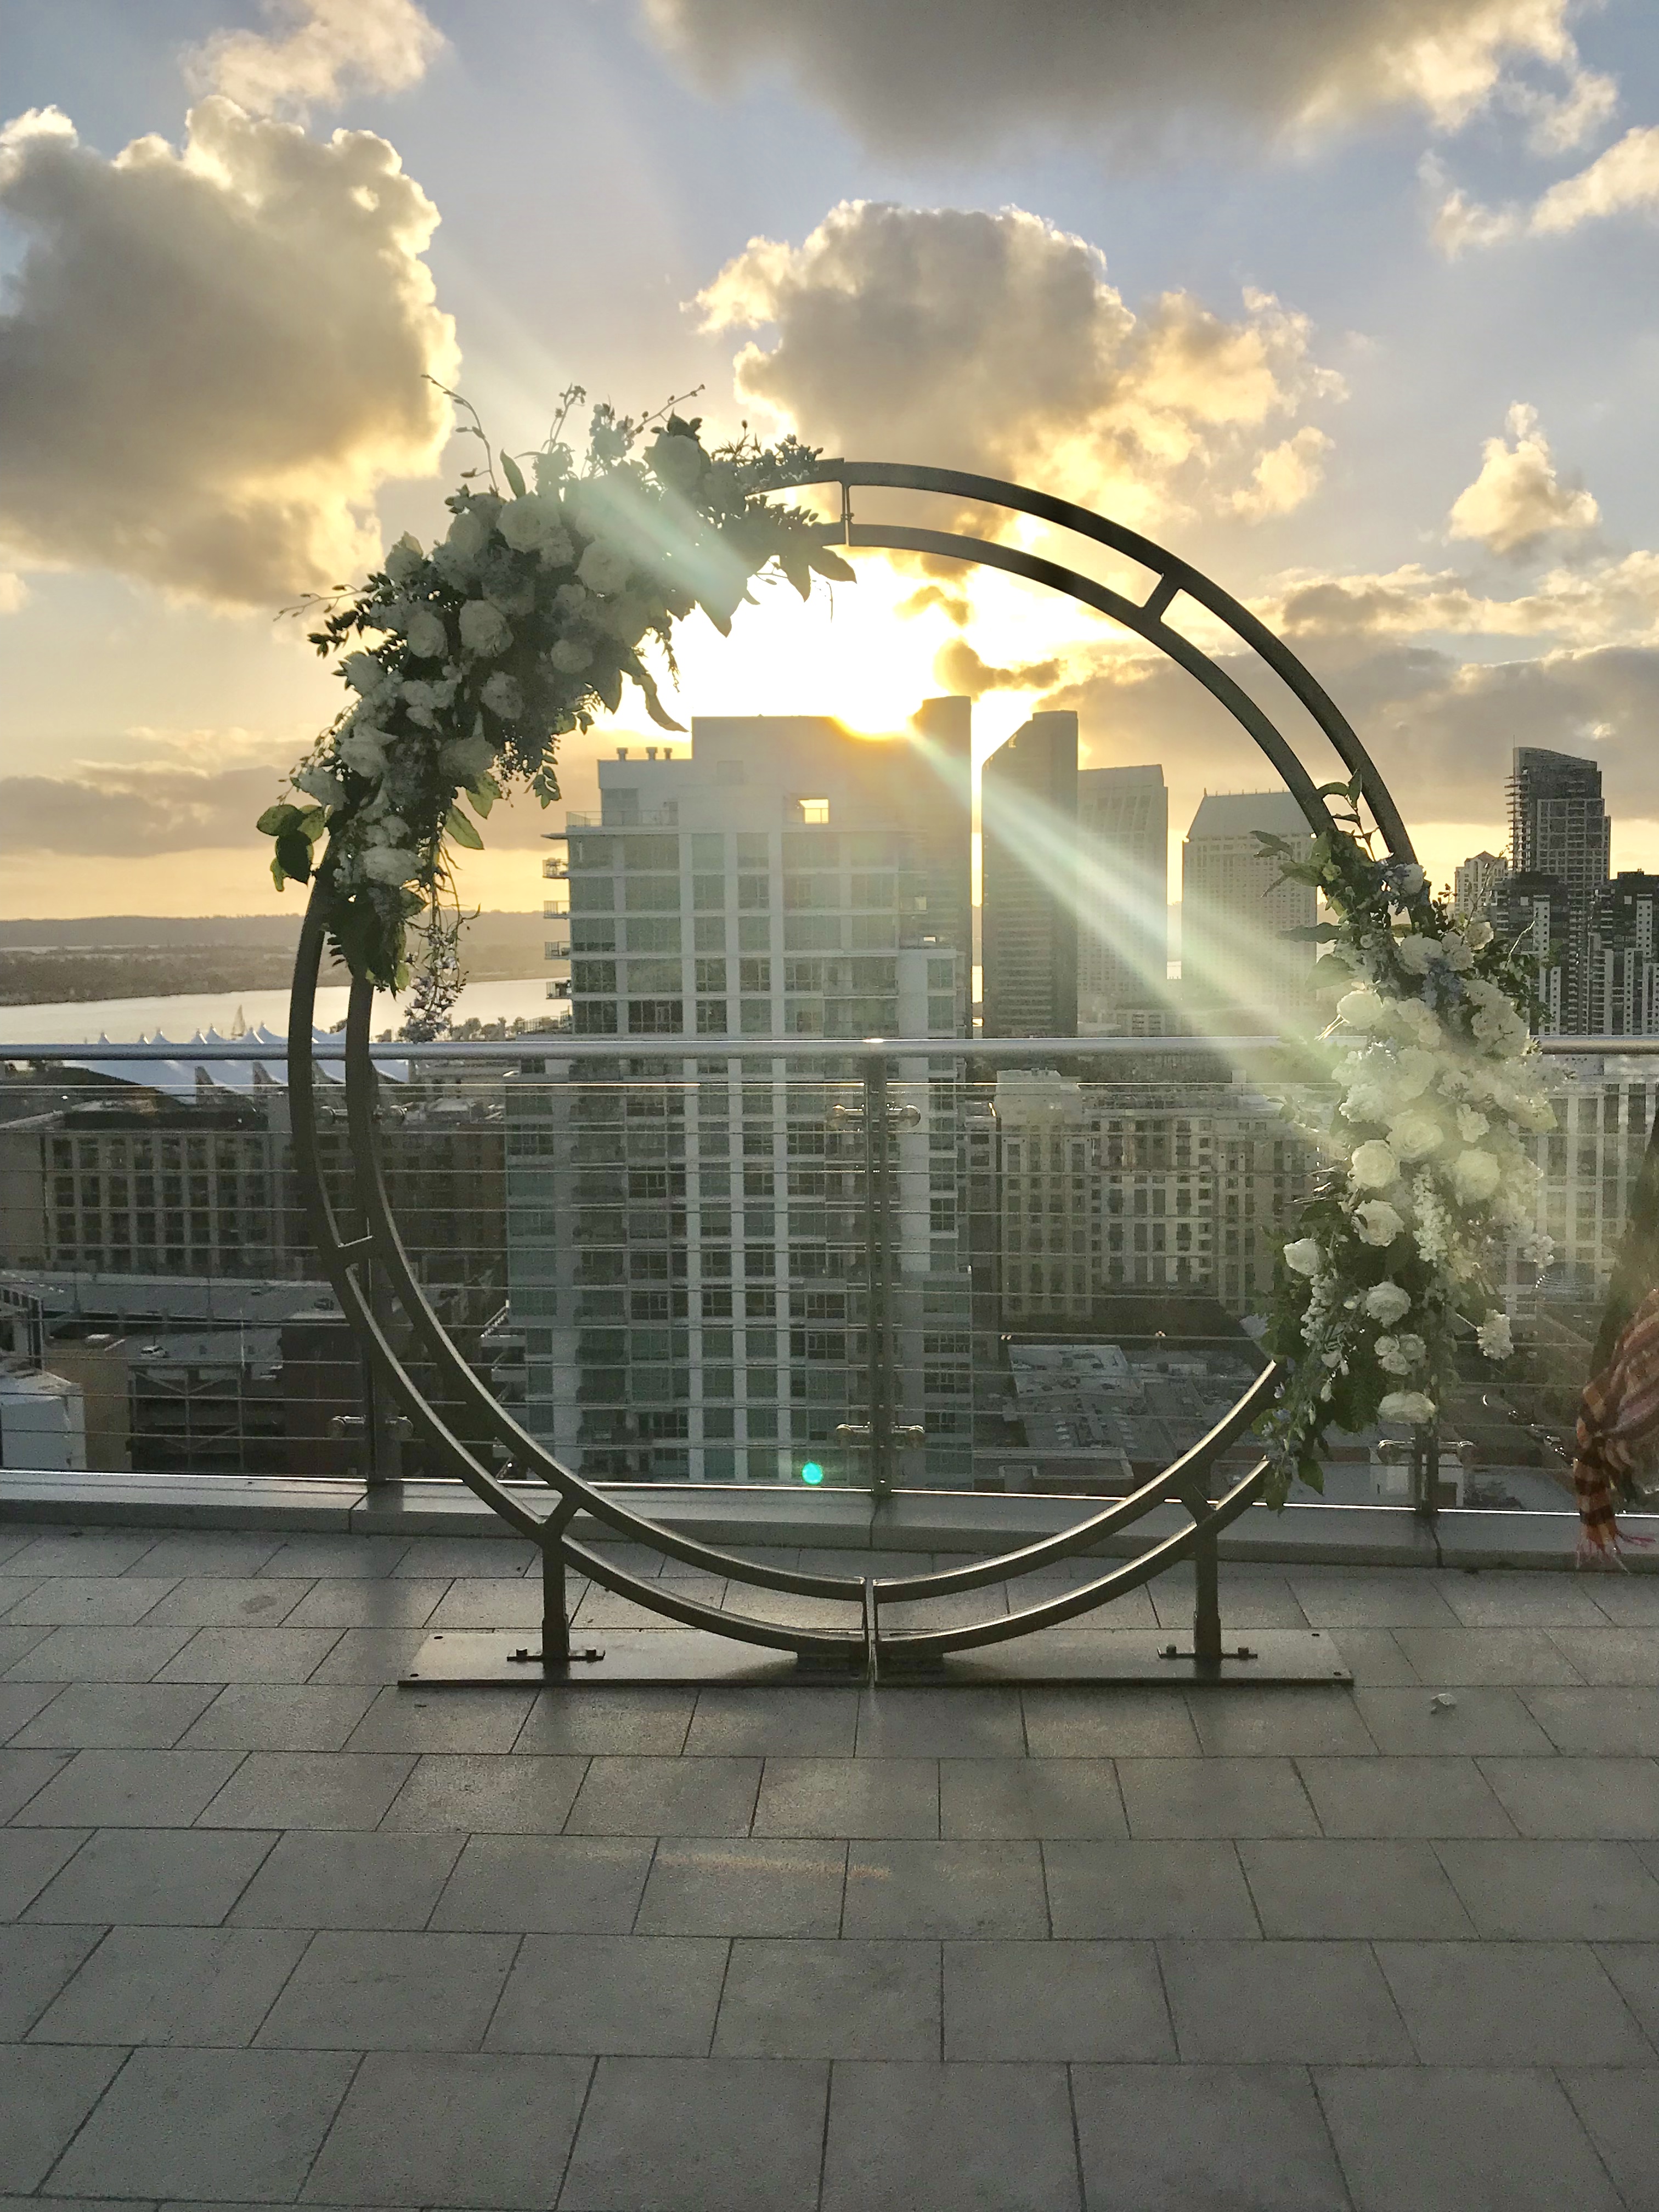 Circle and Semi Circle Arch - Wedding & Party Rentals in San Diego, CA